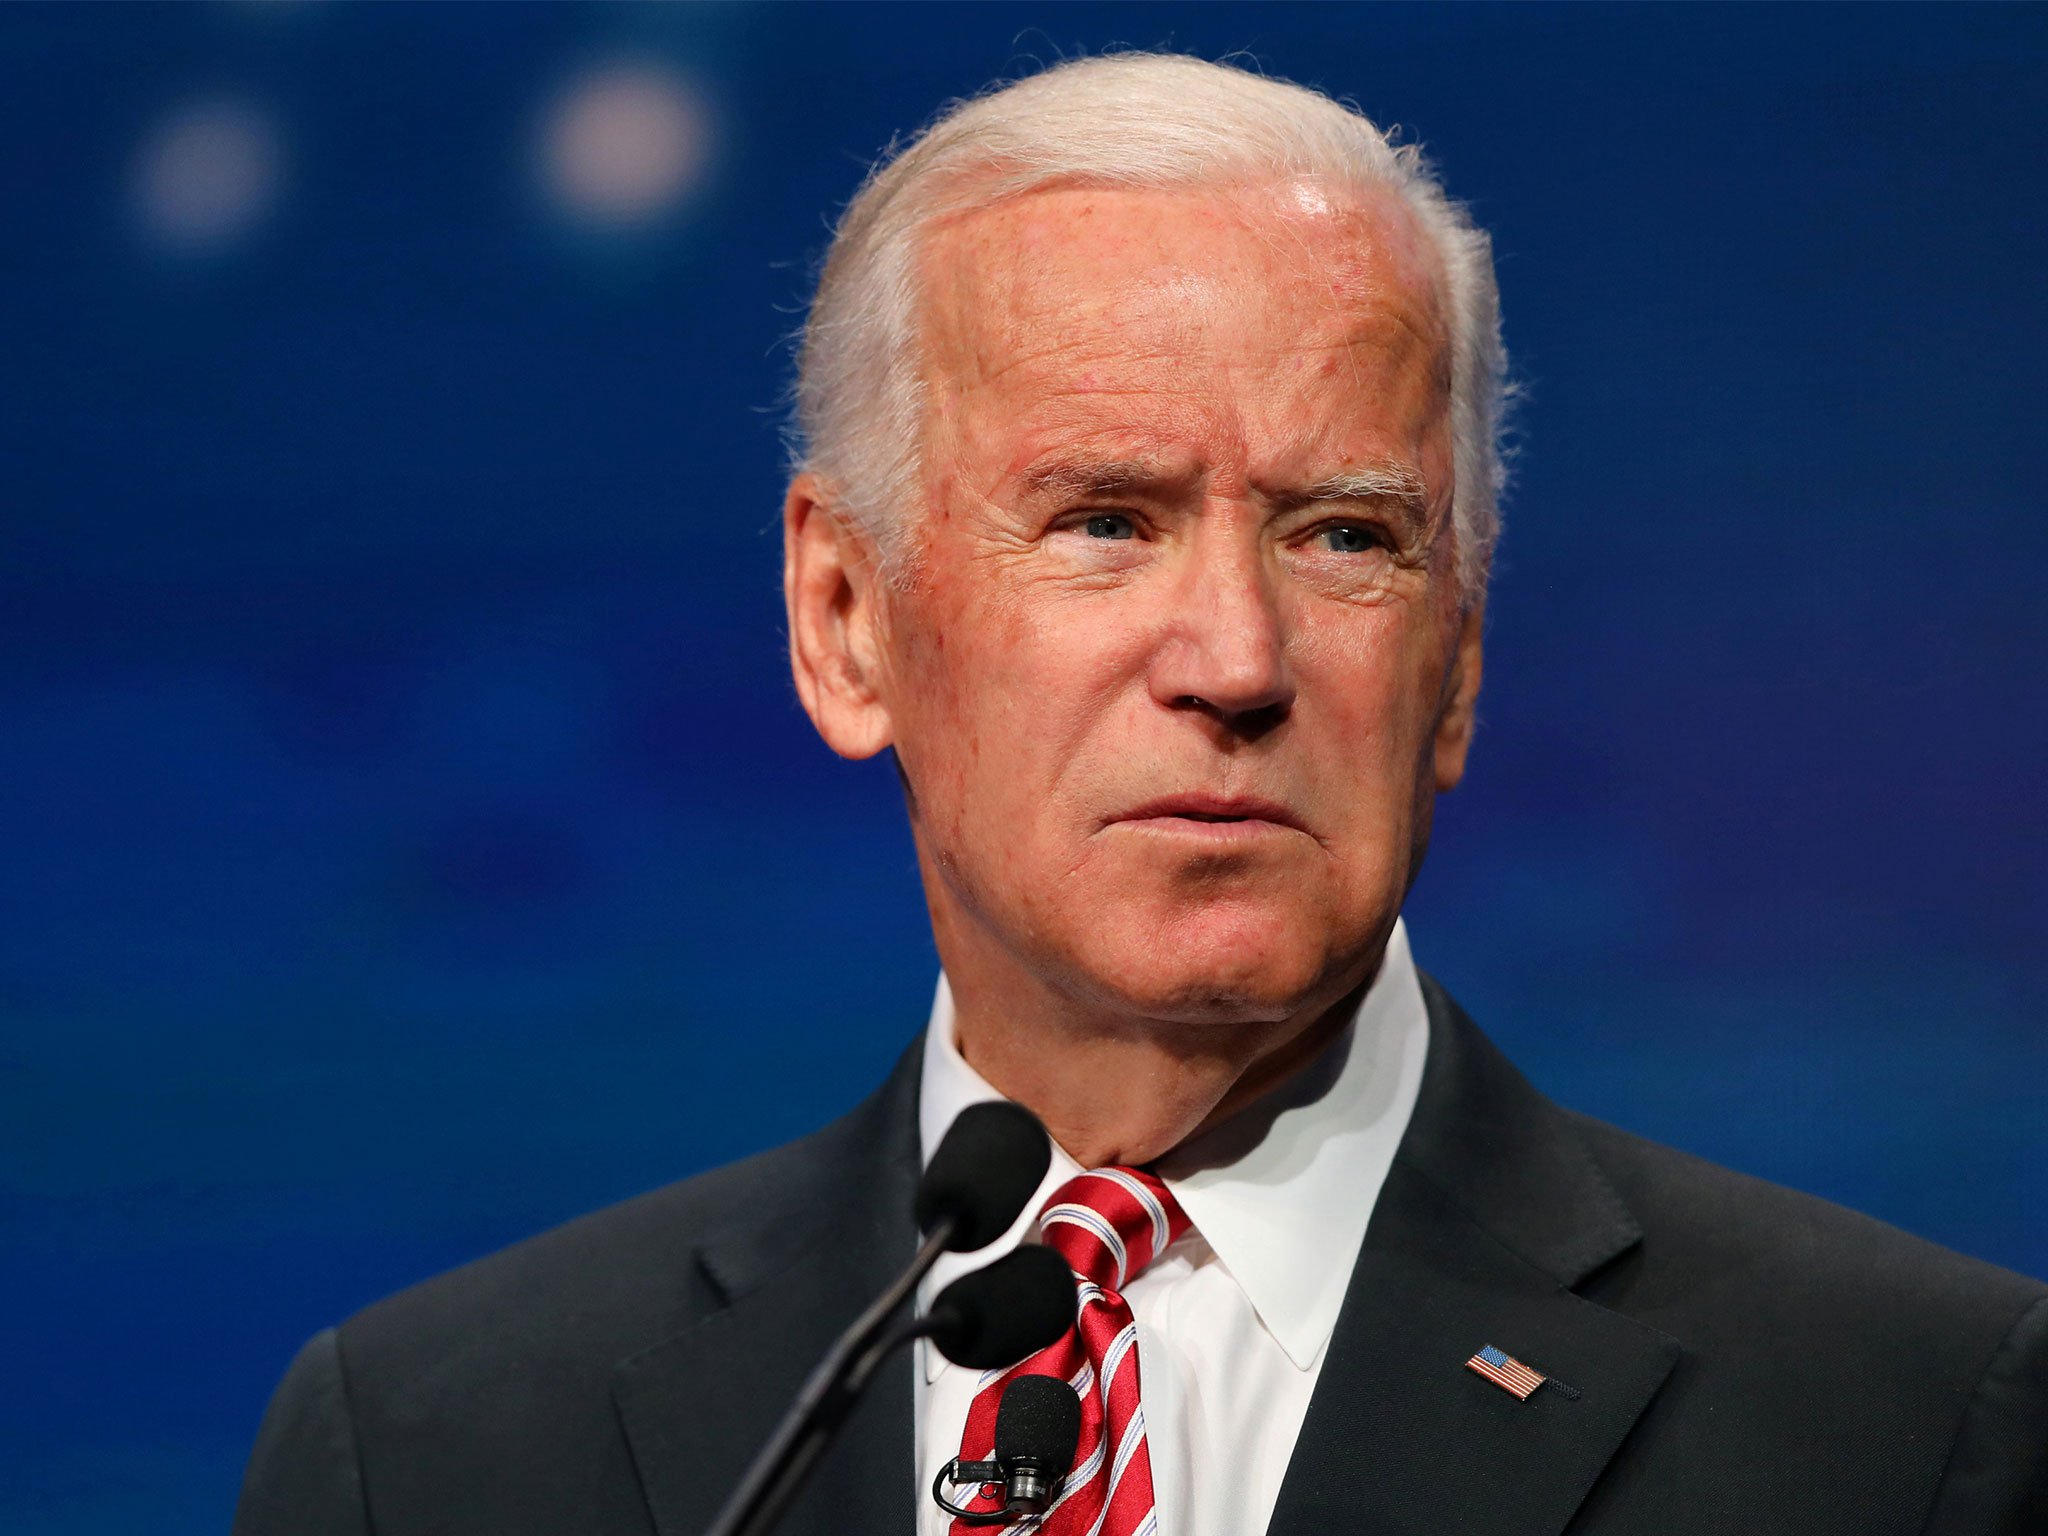 Biden to call for unity, knock Trump in 2020 launch